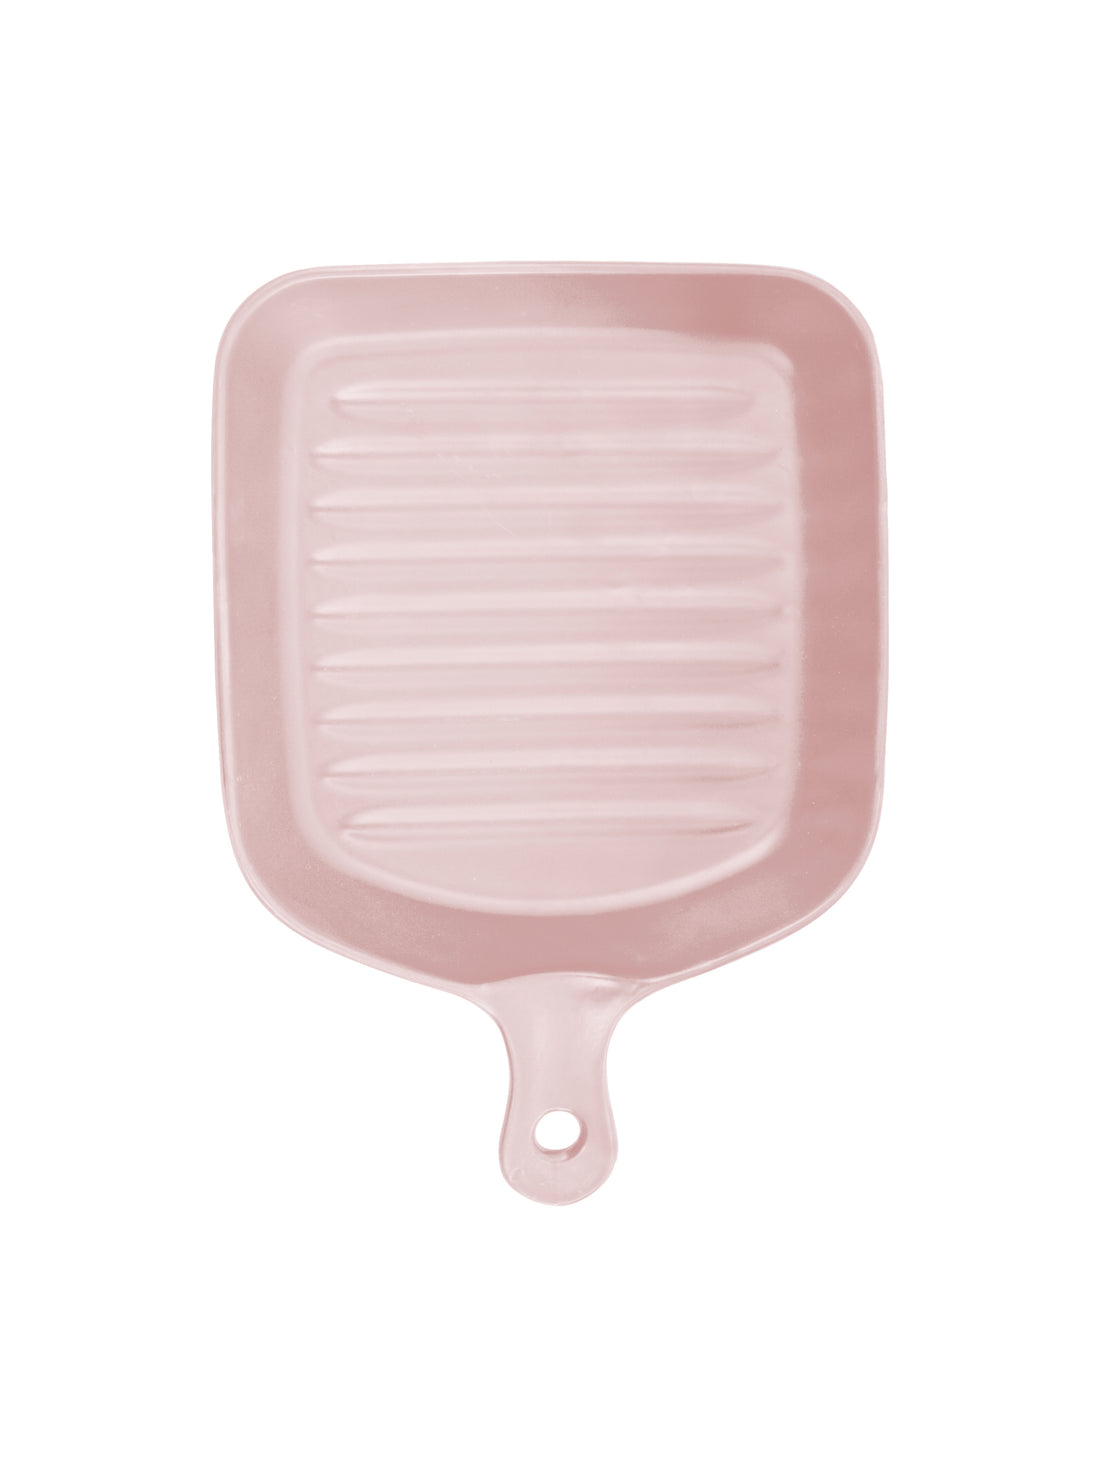 Ceramic Square Grill Plates for Serving, Pink Color